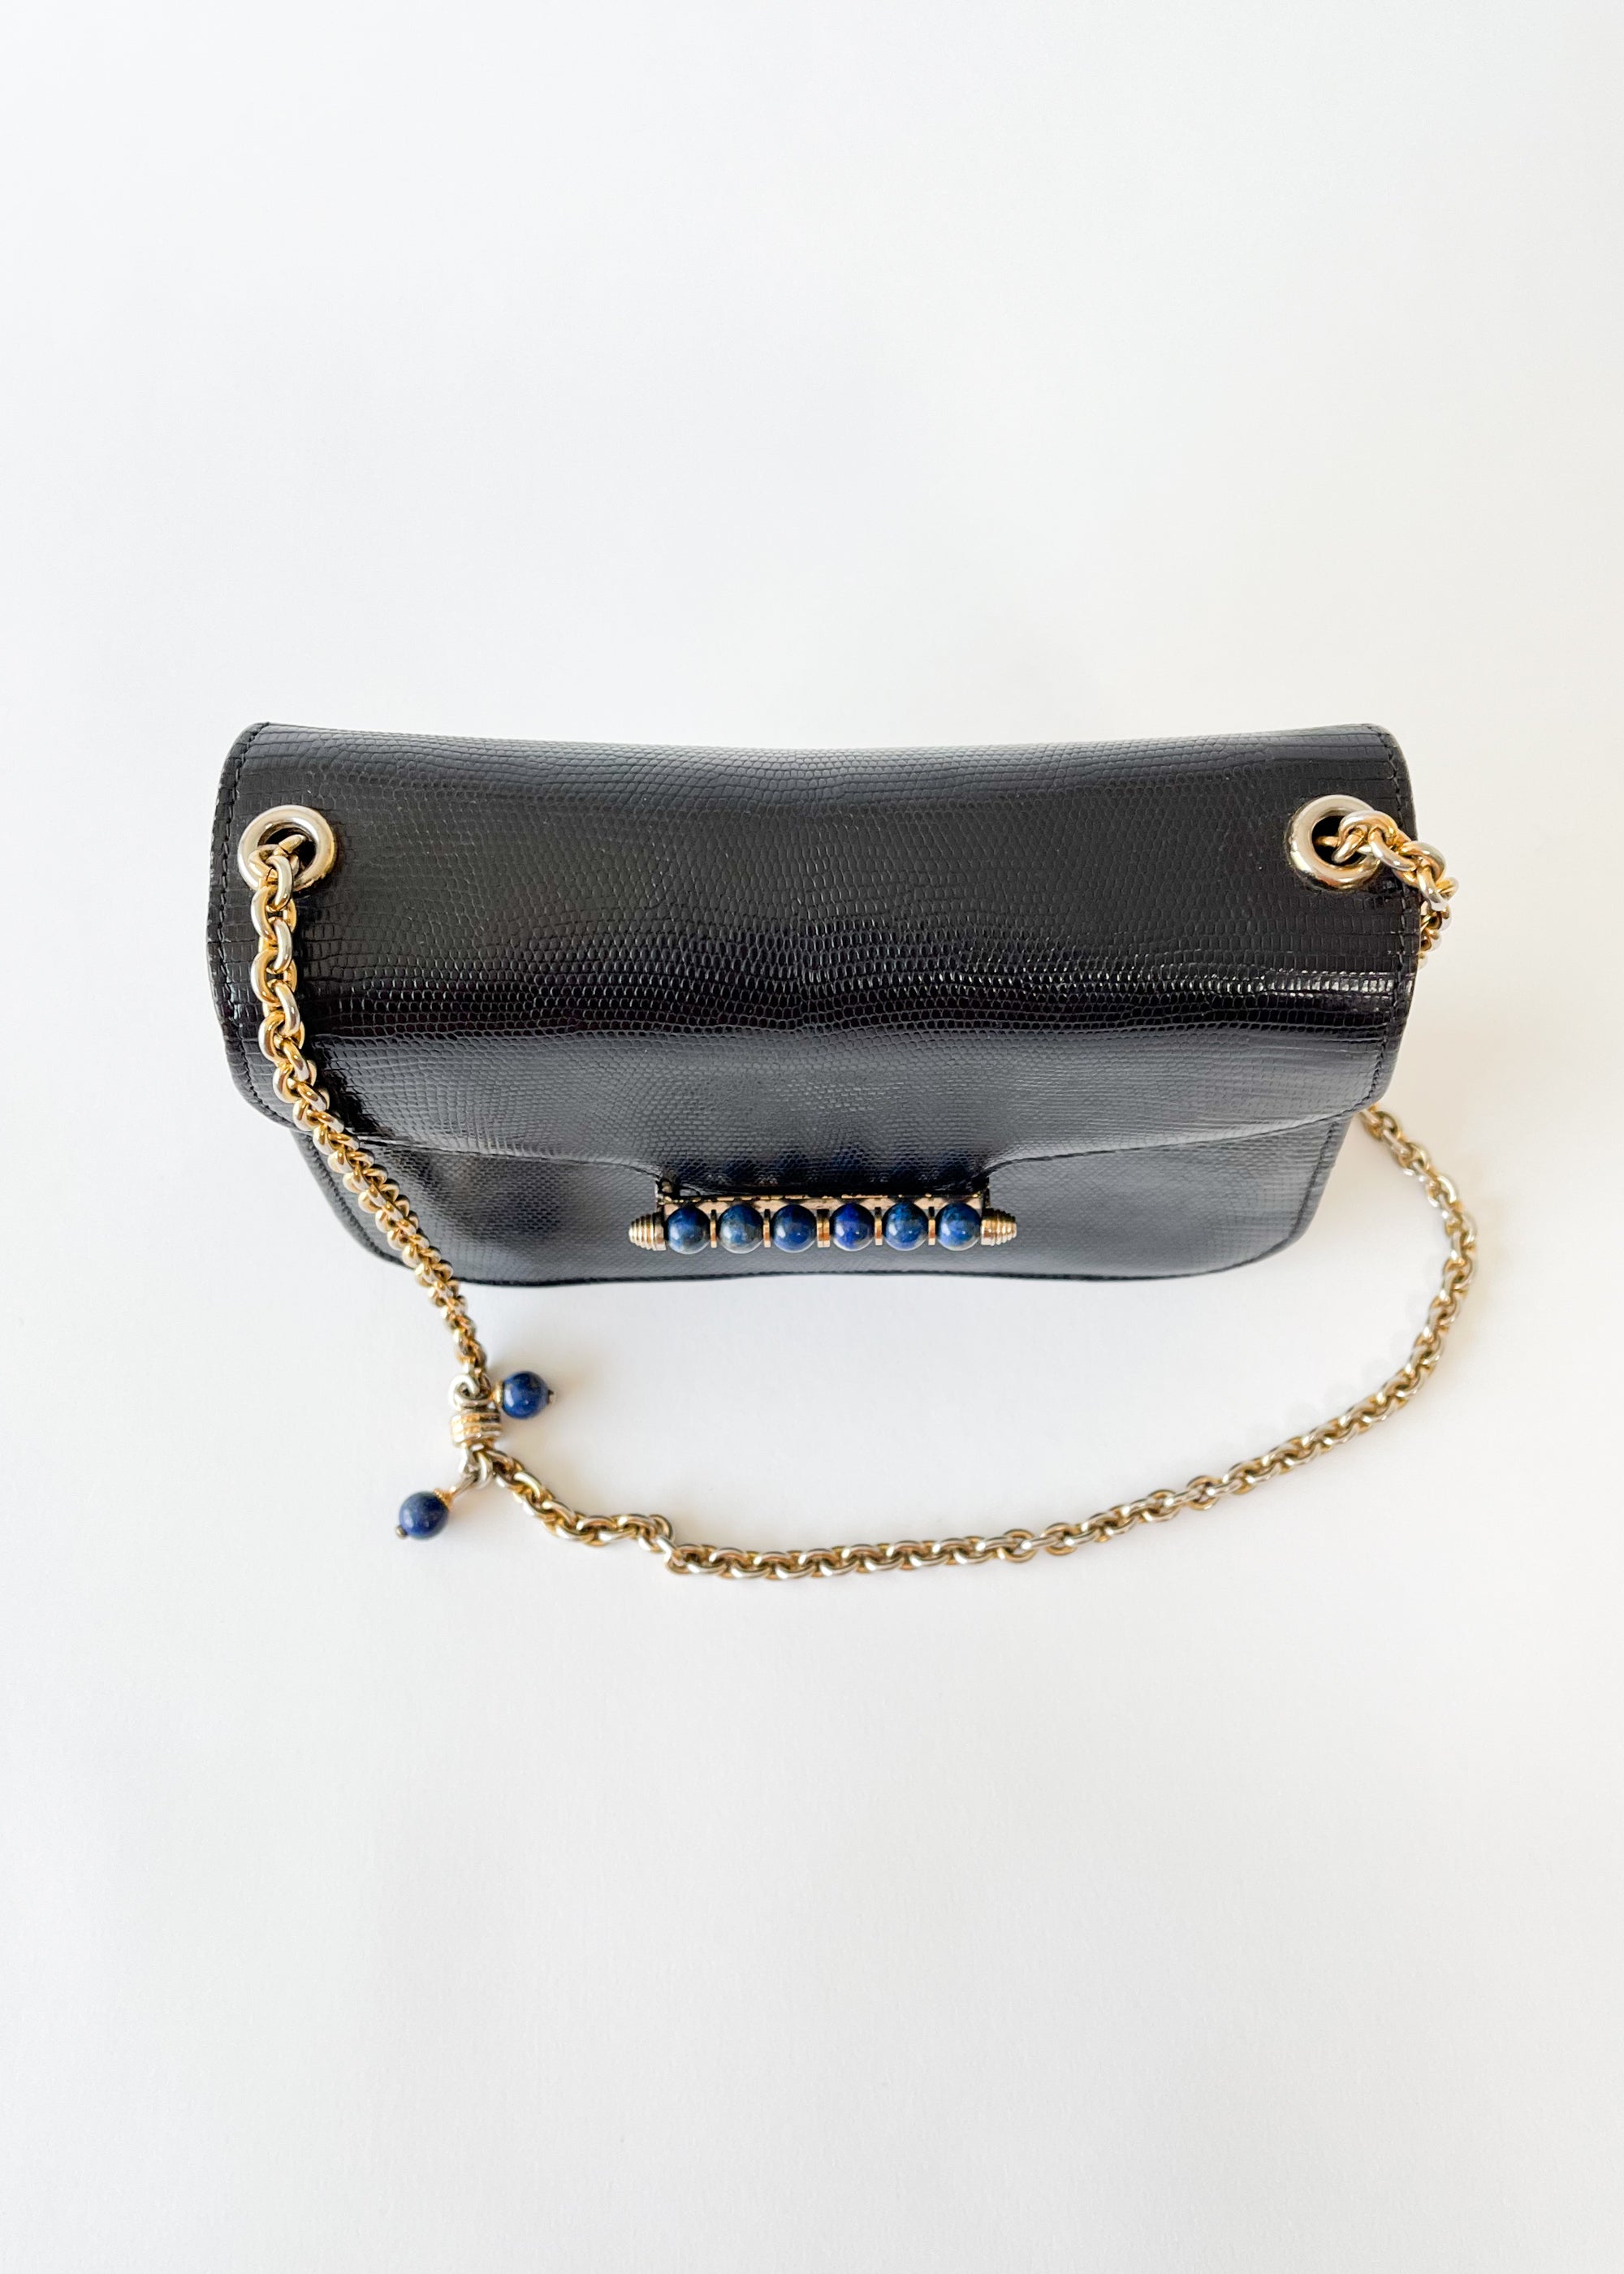 Vintage 1960s Black Purse with Gold Chain